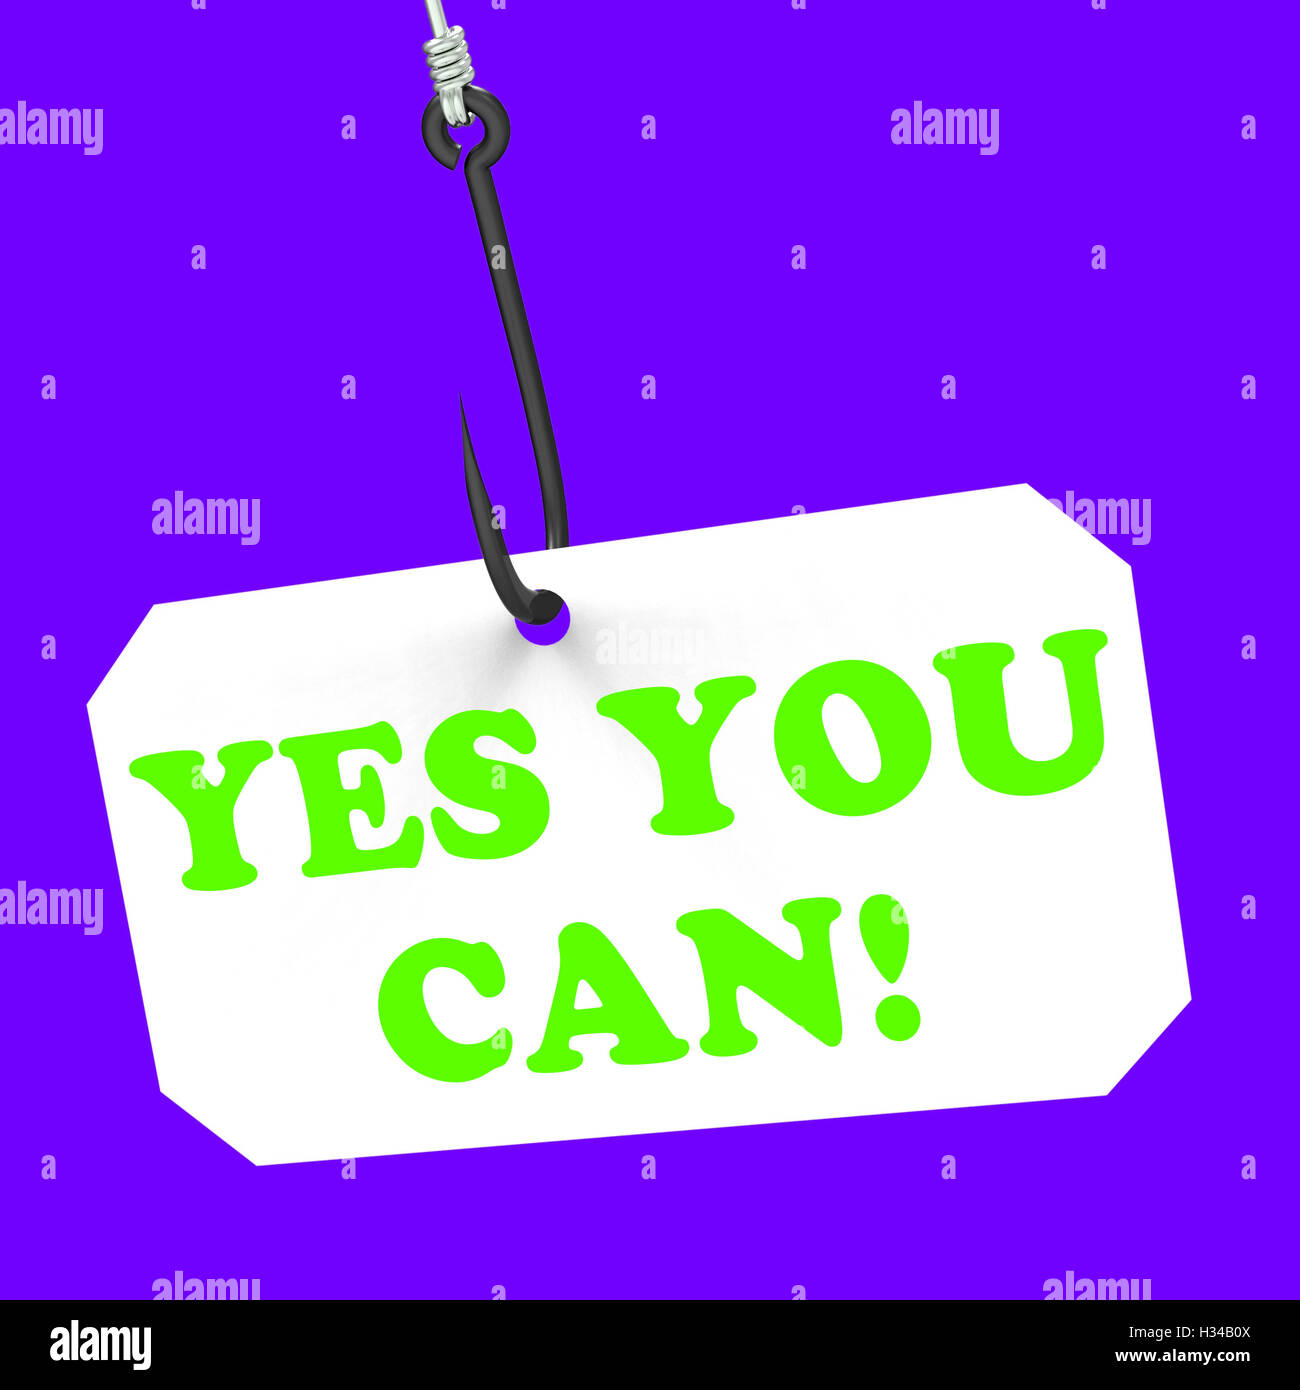 Yes You Can! On Hook Means Inspiration And Motivation Stock Photo